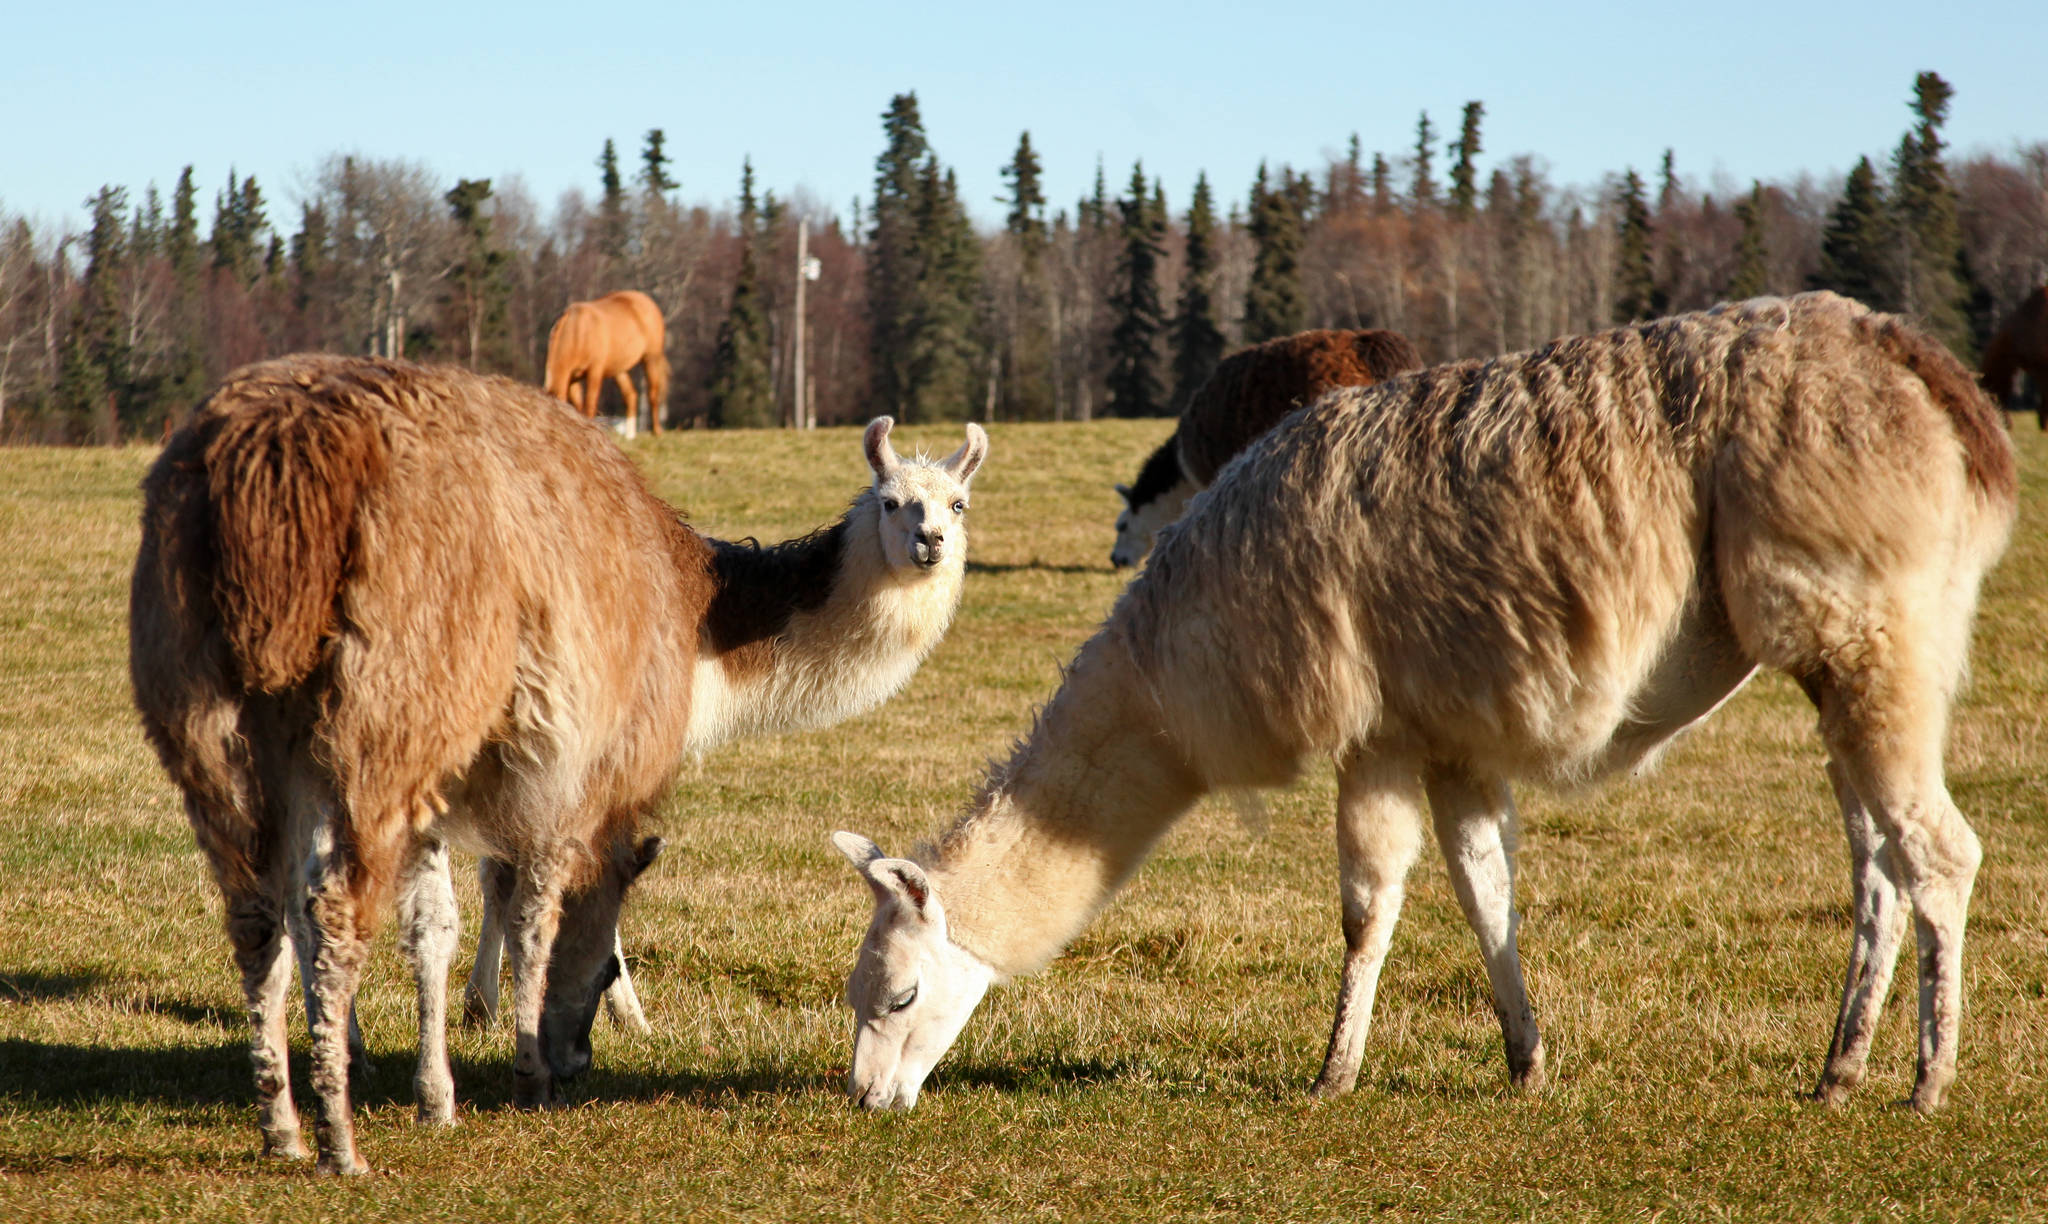 Llamas graze in the pasture of Diamond M Ranch Resort on Tuesday, Oct. 17, 2017 near Kenai, Alaska. Three calves were born this summer to the herd that Diamond M owners Ronna and Blair Martin have kept since the 1990s. Though members of the Martin family have made yarn and felt hats from llama wool, taken them as pack animals on camping trips, and occassionally harvested one for meat, the llamas are mostly “exotic lawn ornaments,” Ronna Martin said.